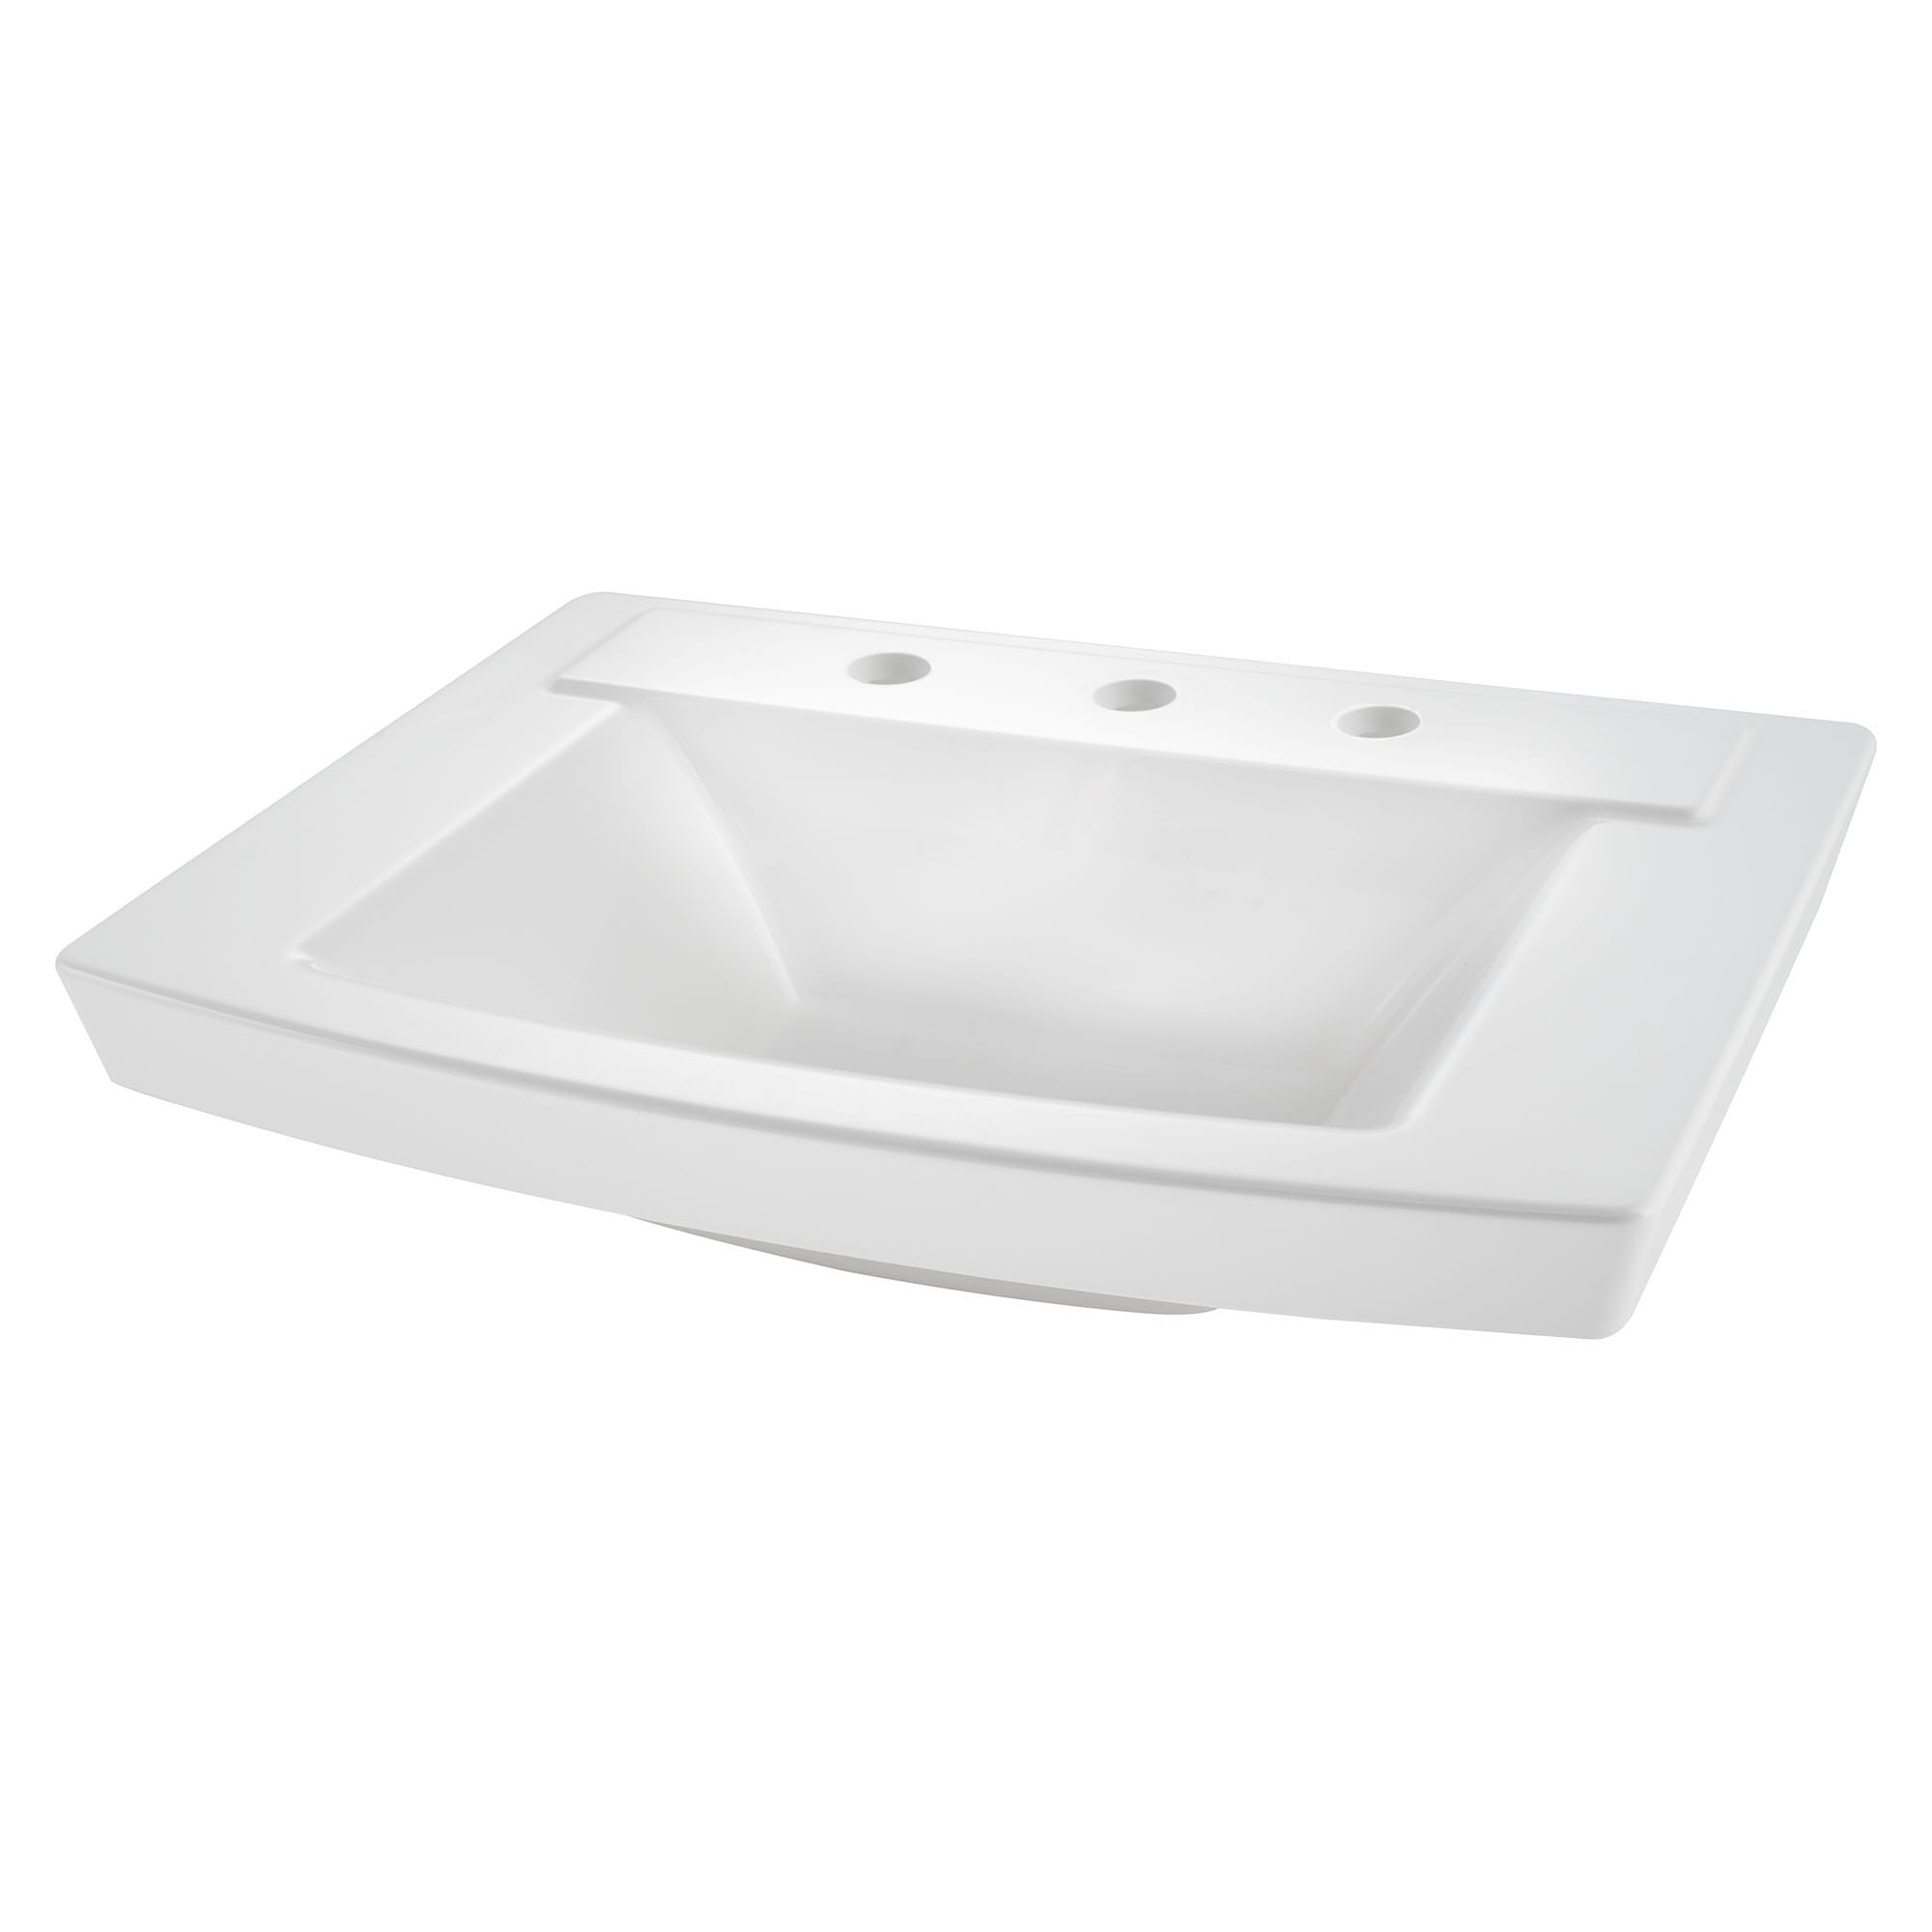 Townsend 24 x 18 Inch Above Counter Sink With 8 Inch Widespread WHITE